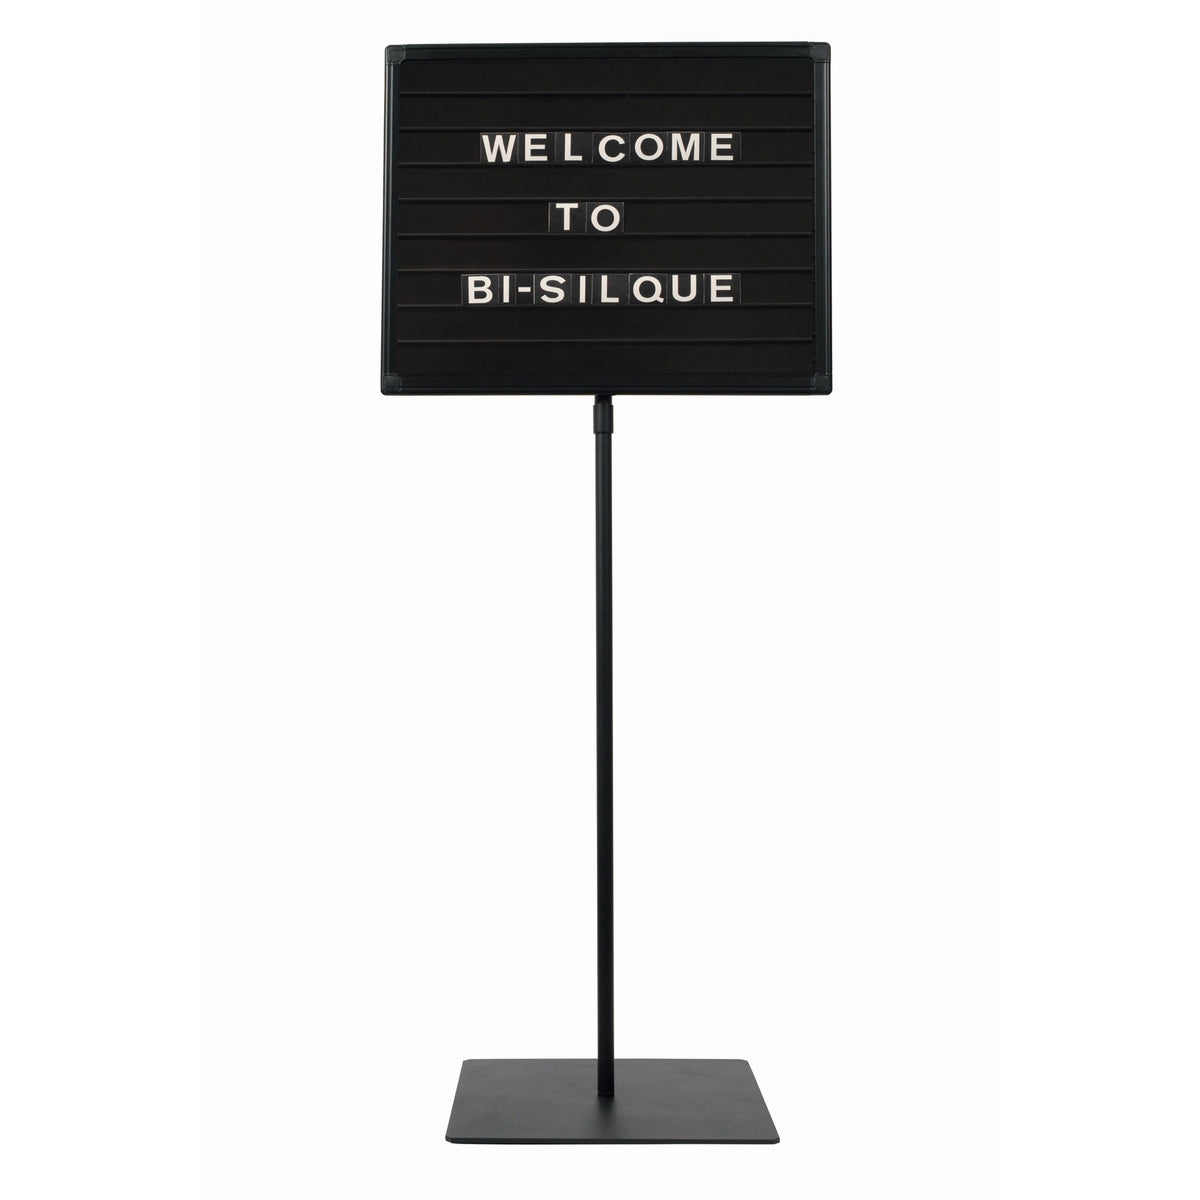 SIG06040404 Magnetic Changeable Letter Message Board with Floor Stand for Commercial, Wedding Halls, Funeral Homes, Conference Centers, 18" x 24" by MasterVision